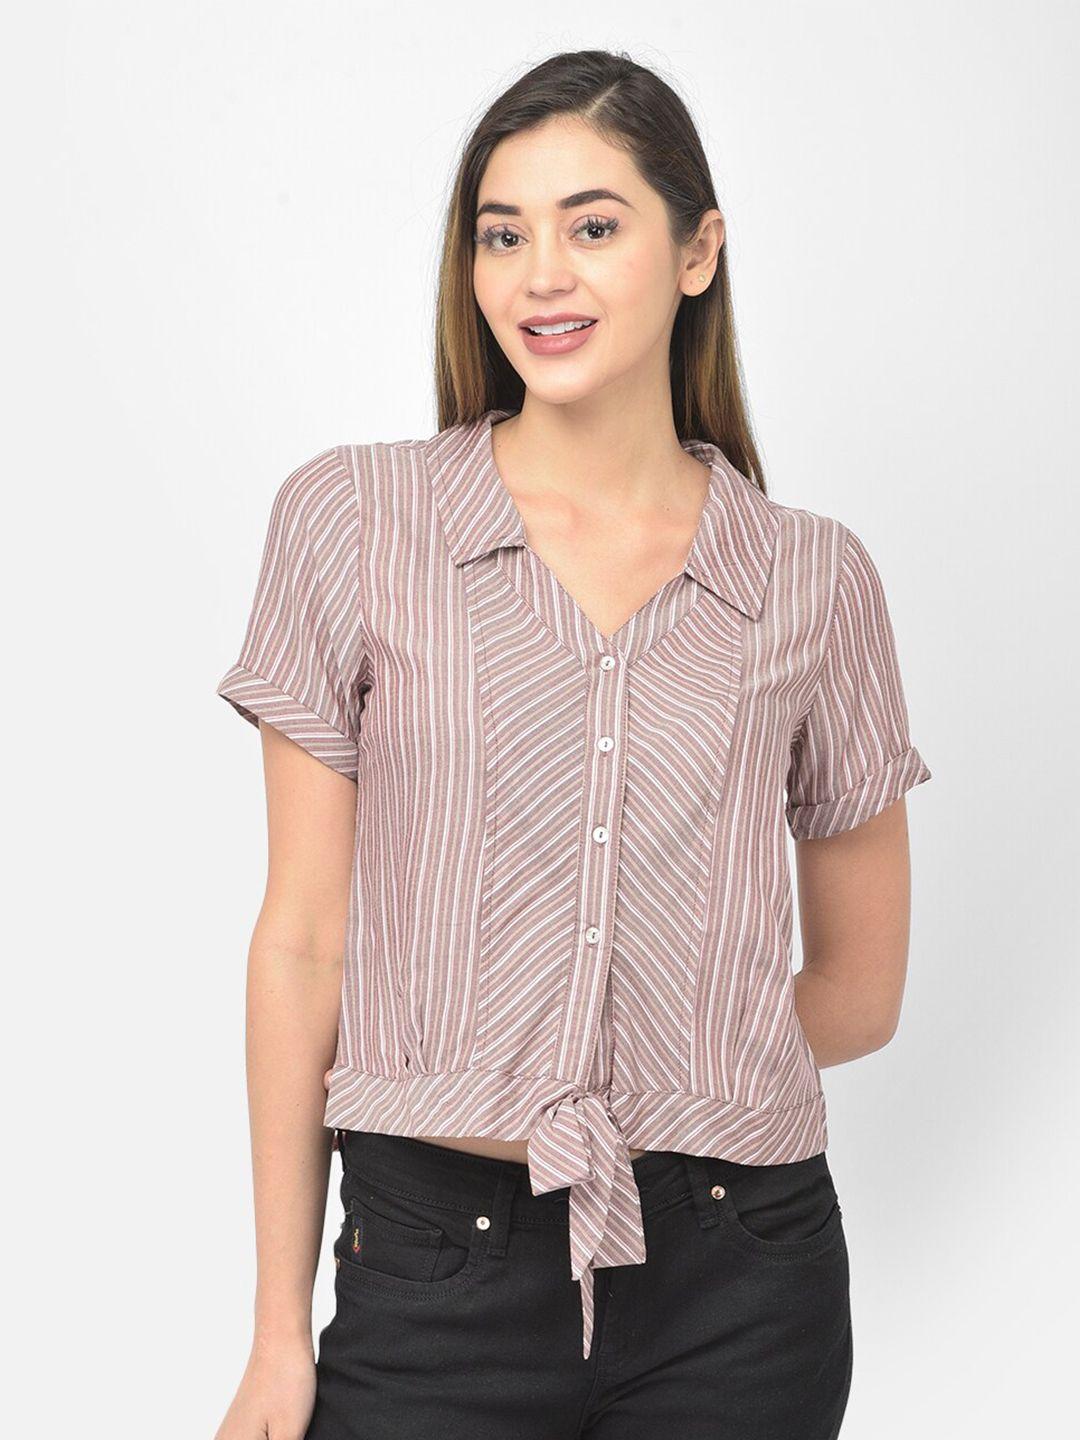 Latin Quarters Brown Striped Shirt Style Top